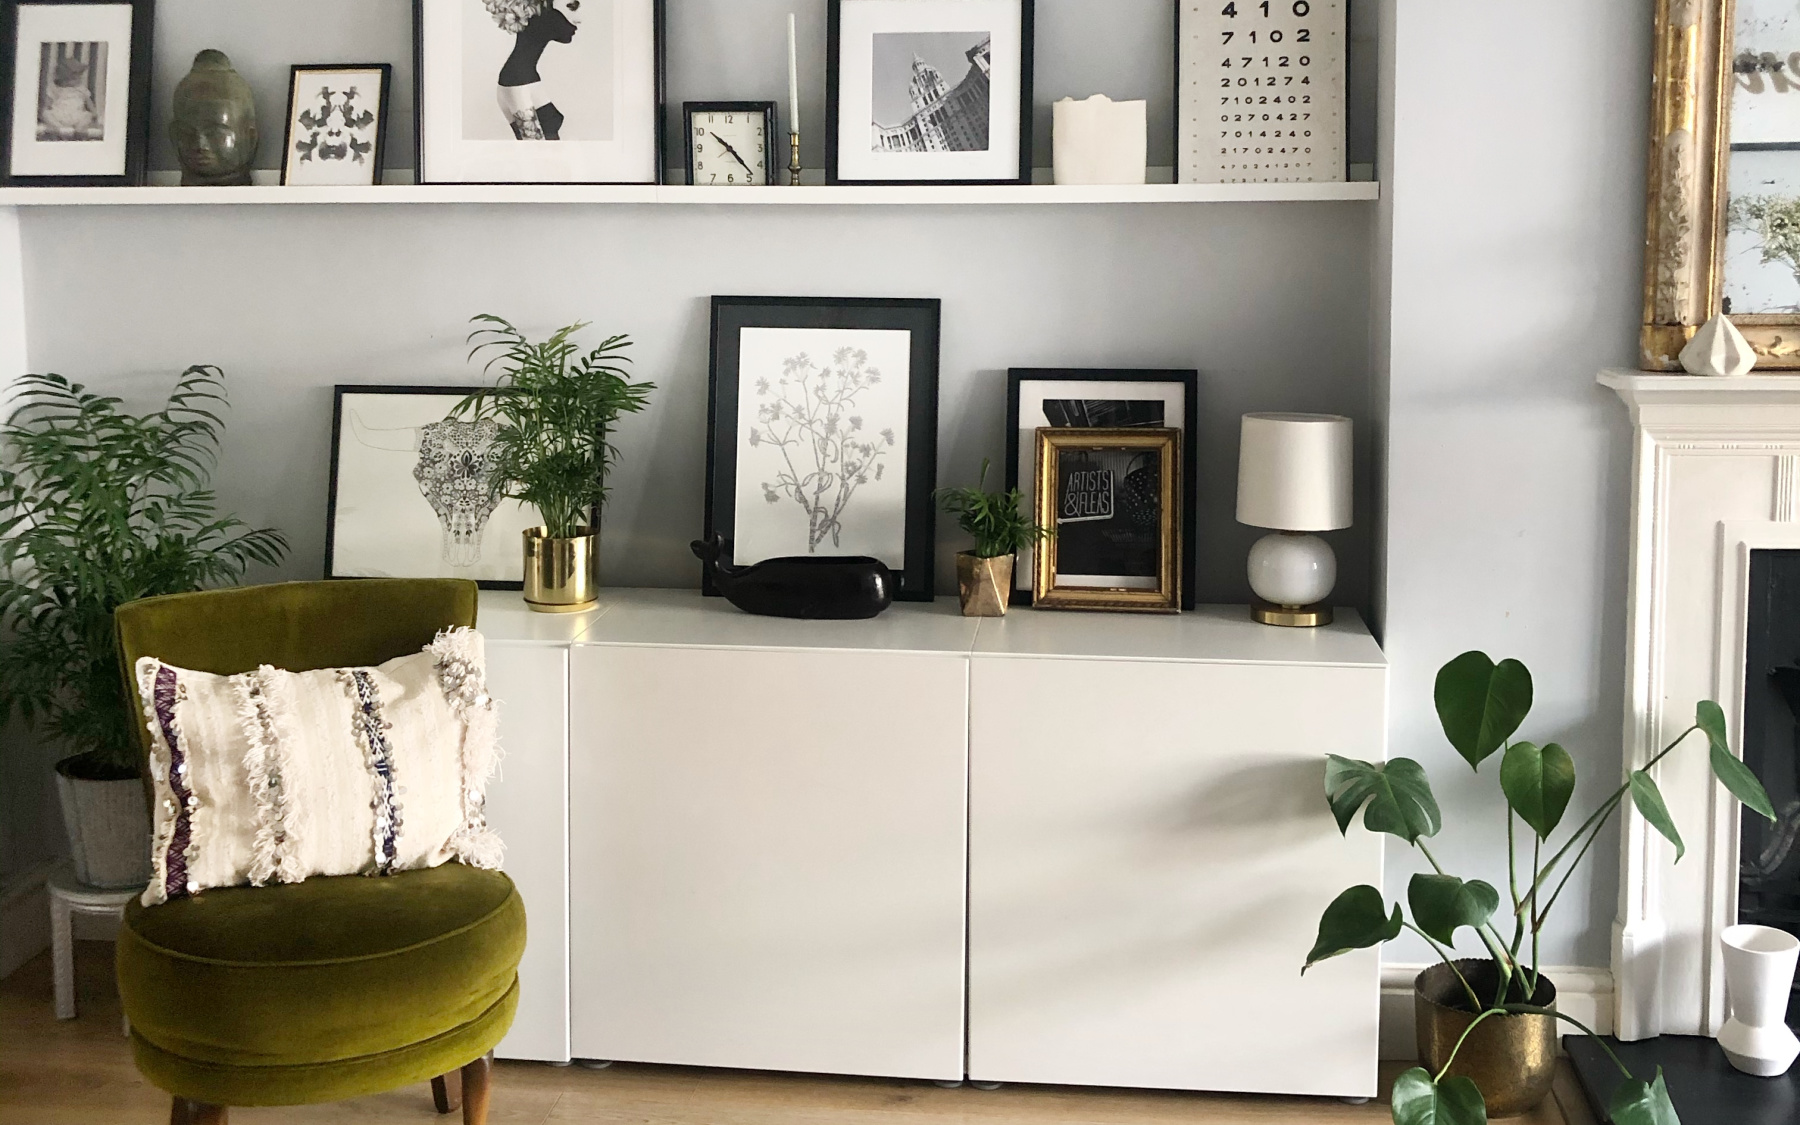 Decorbuddi Shelves and Frames Gallery Wall